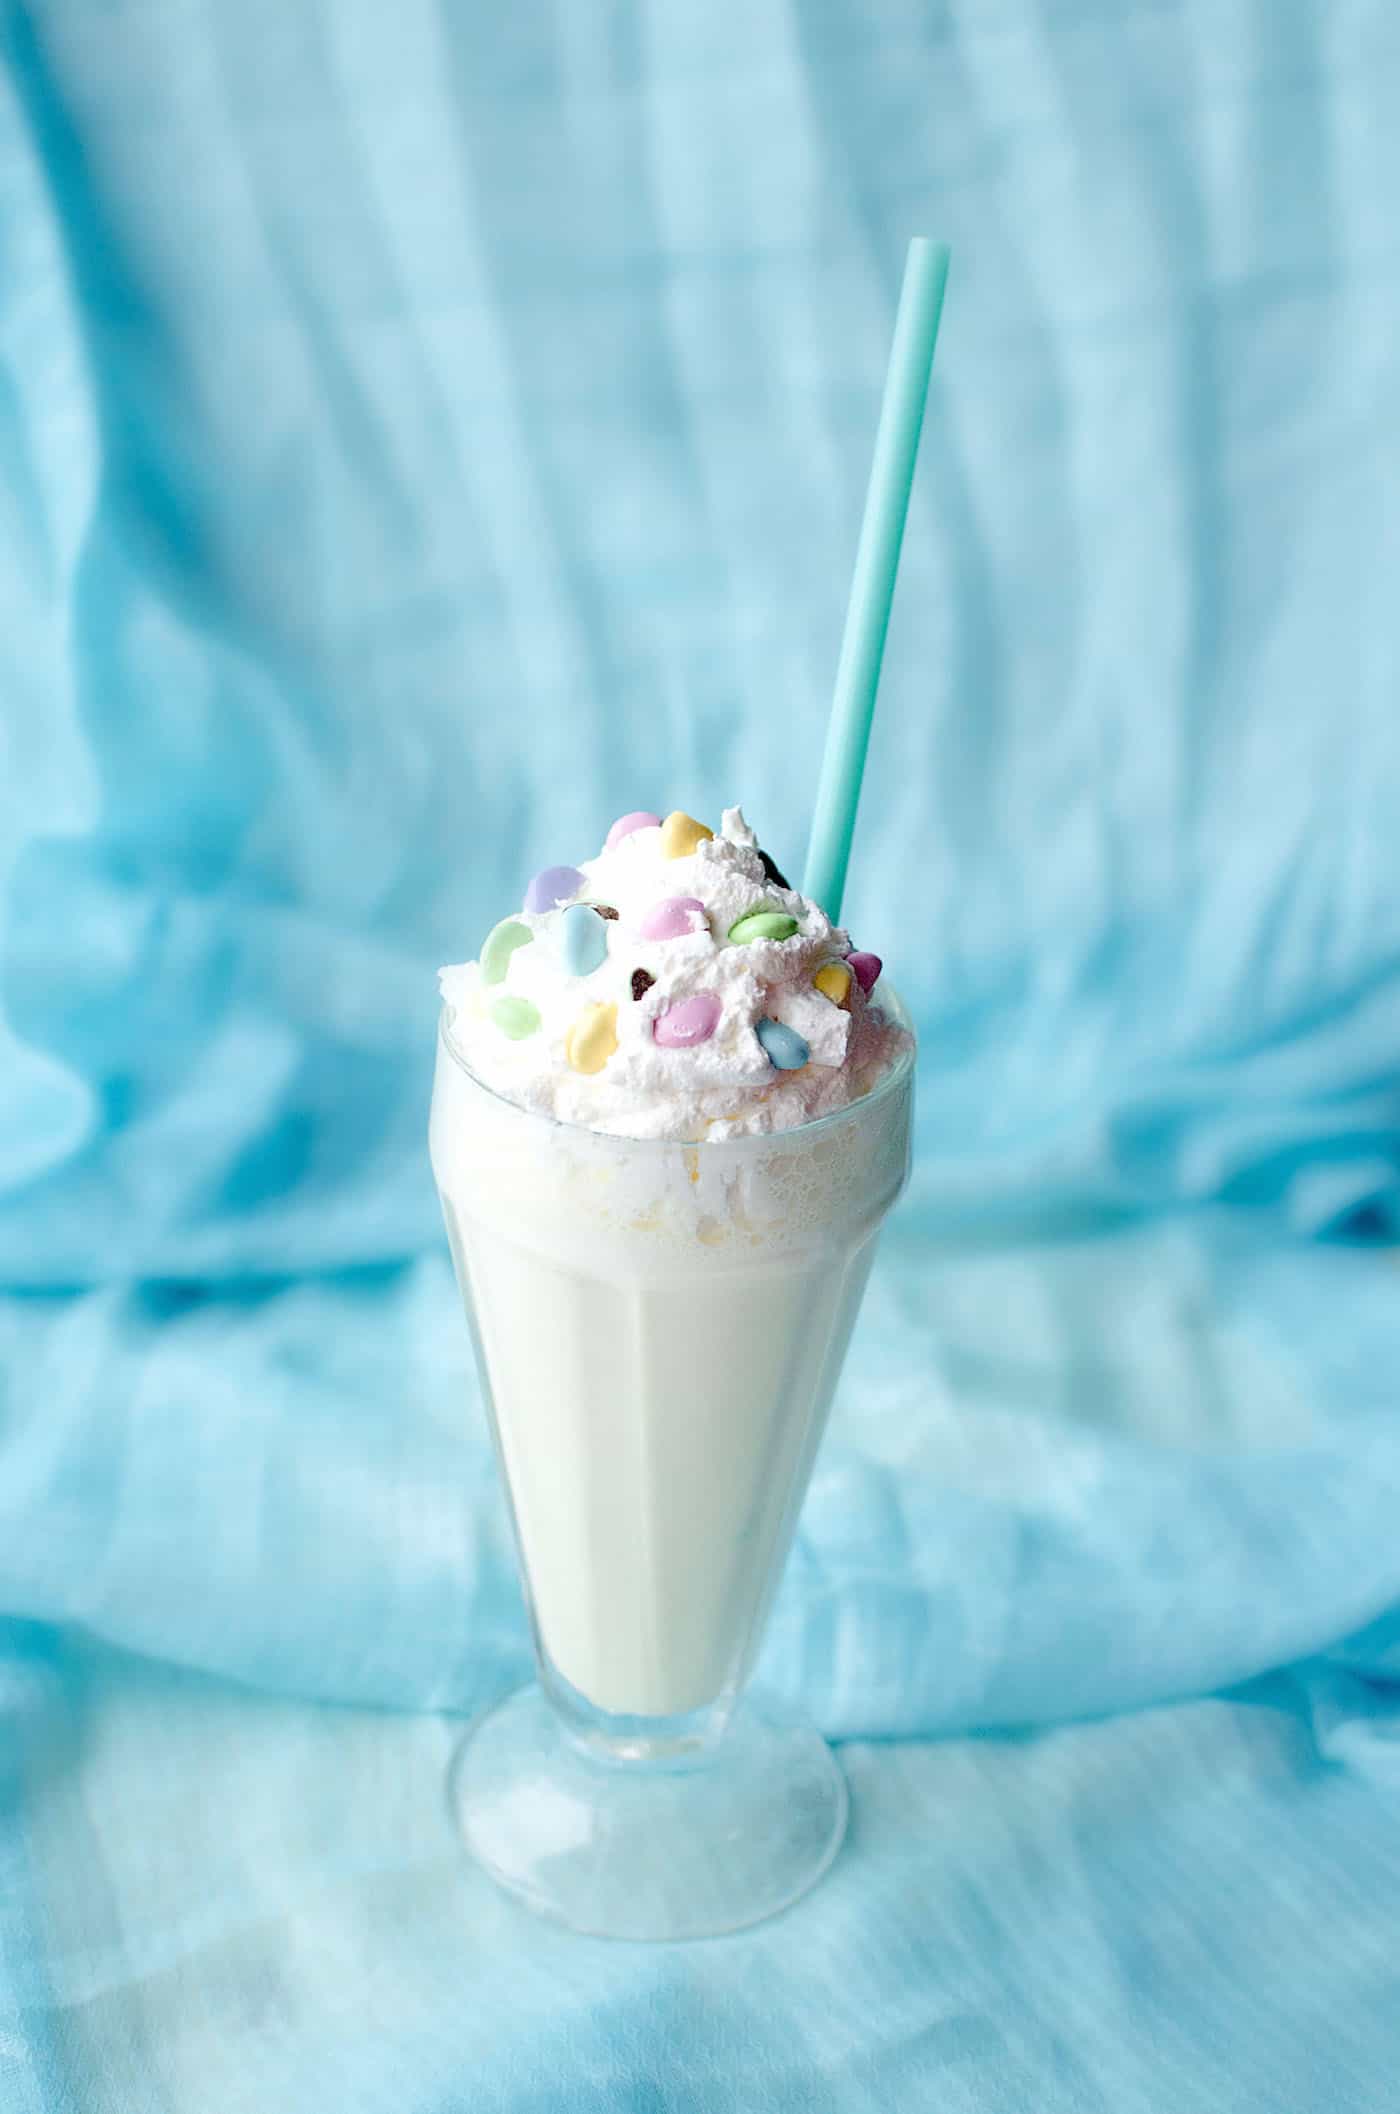 Celebrate the holidays (or any time of year) with this delicious banana milkshake! Whipped cream, Peeps and M&Ms on top make it extra festive. 